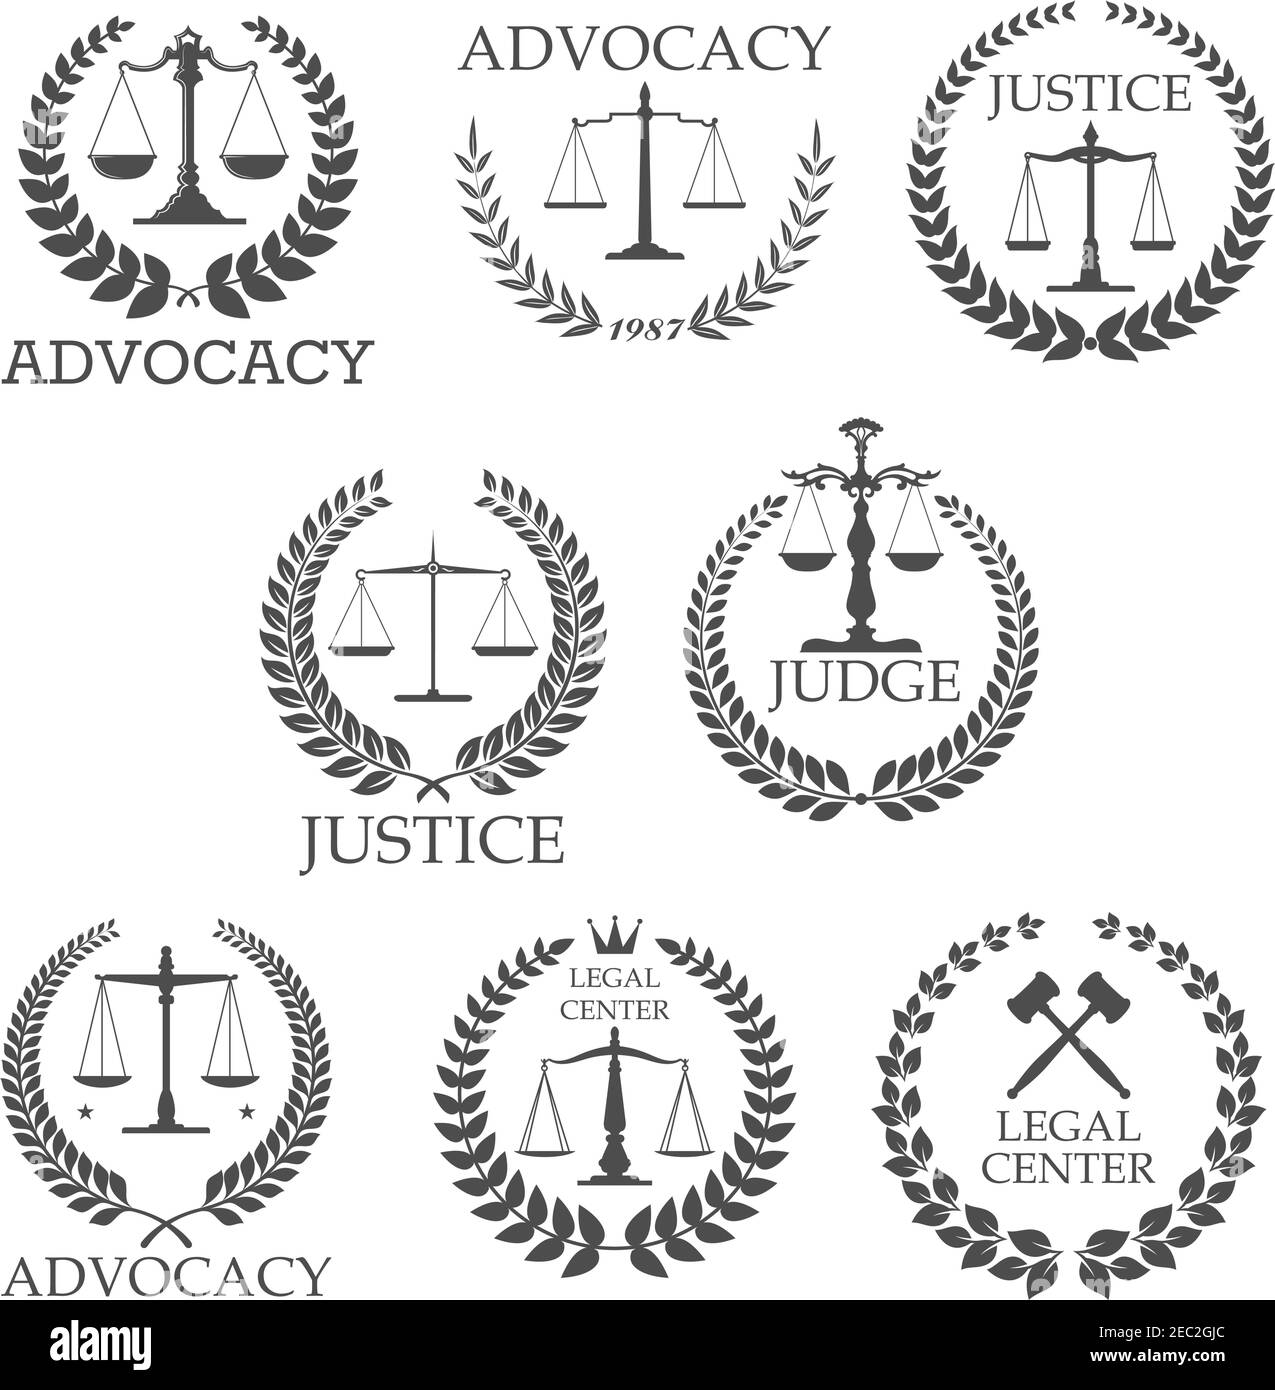 Legal protection and lawyer services design templates with crossed judge gavels and scales of justice, framed by laurel wreaths and text Advocacy, Jus Stock Vector